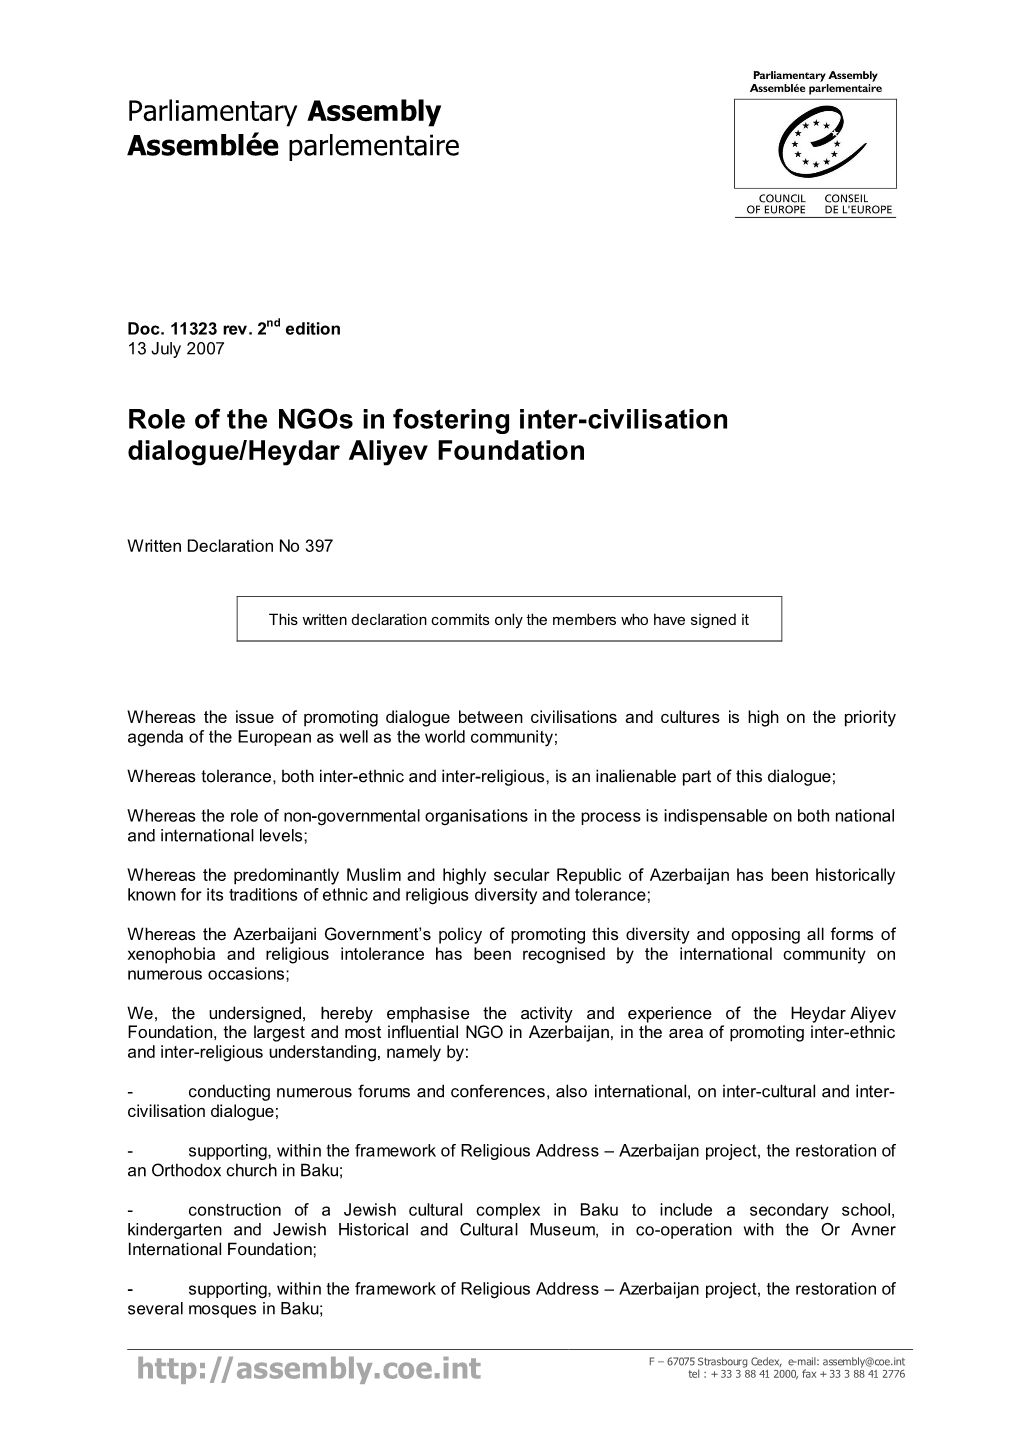 Role of the Ngos in Fostering Inter-Civilisation Dialogue/Heydar Aliyev Foundation